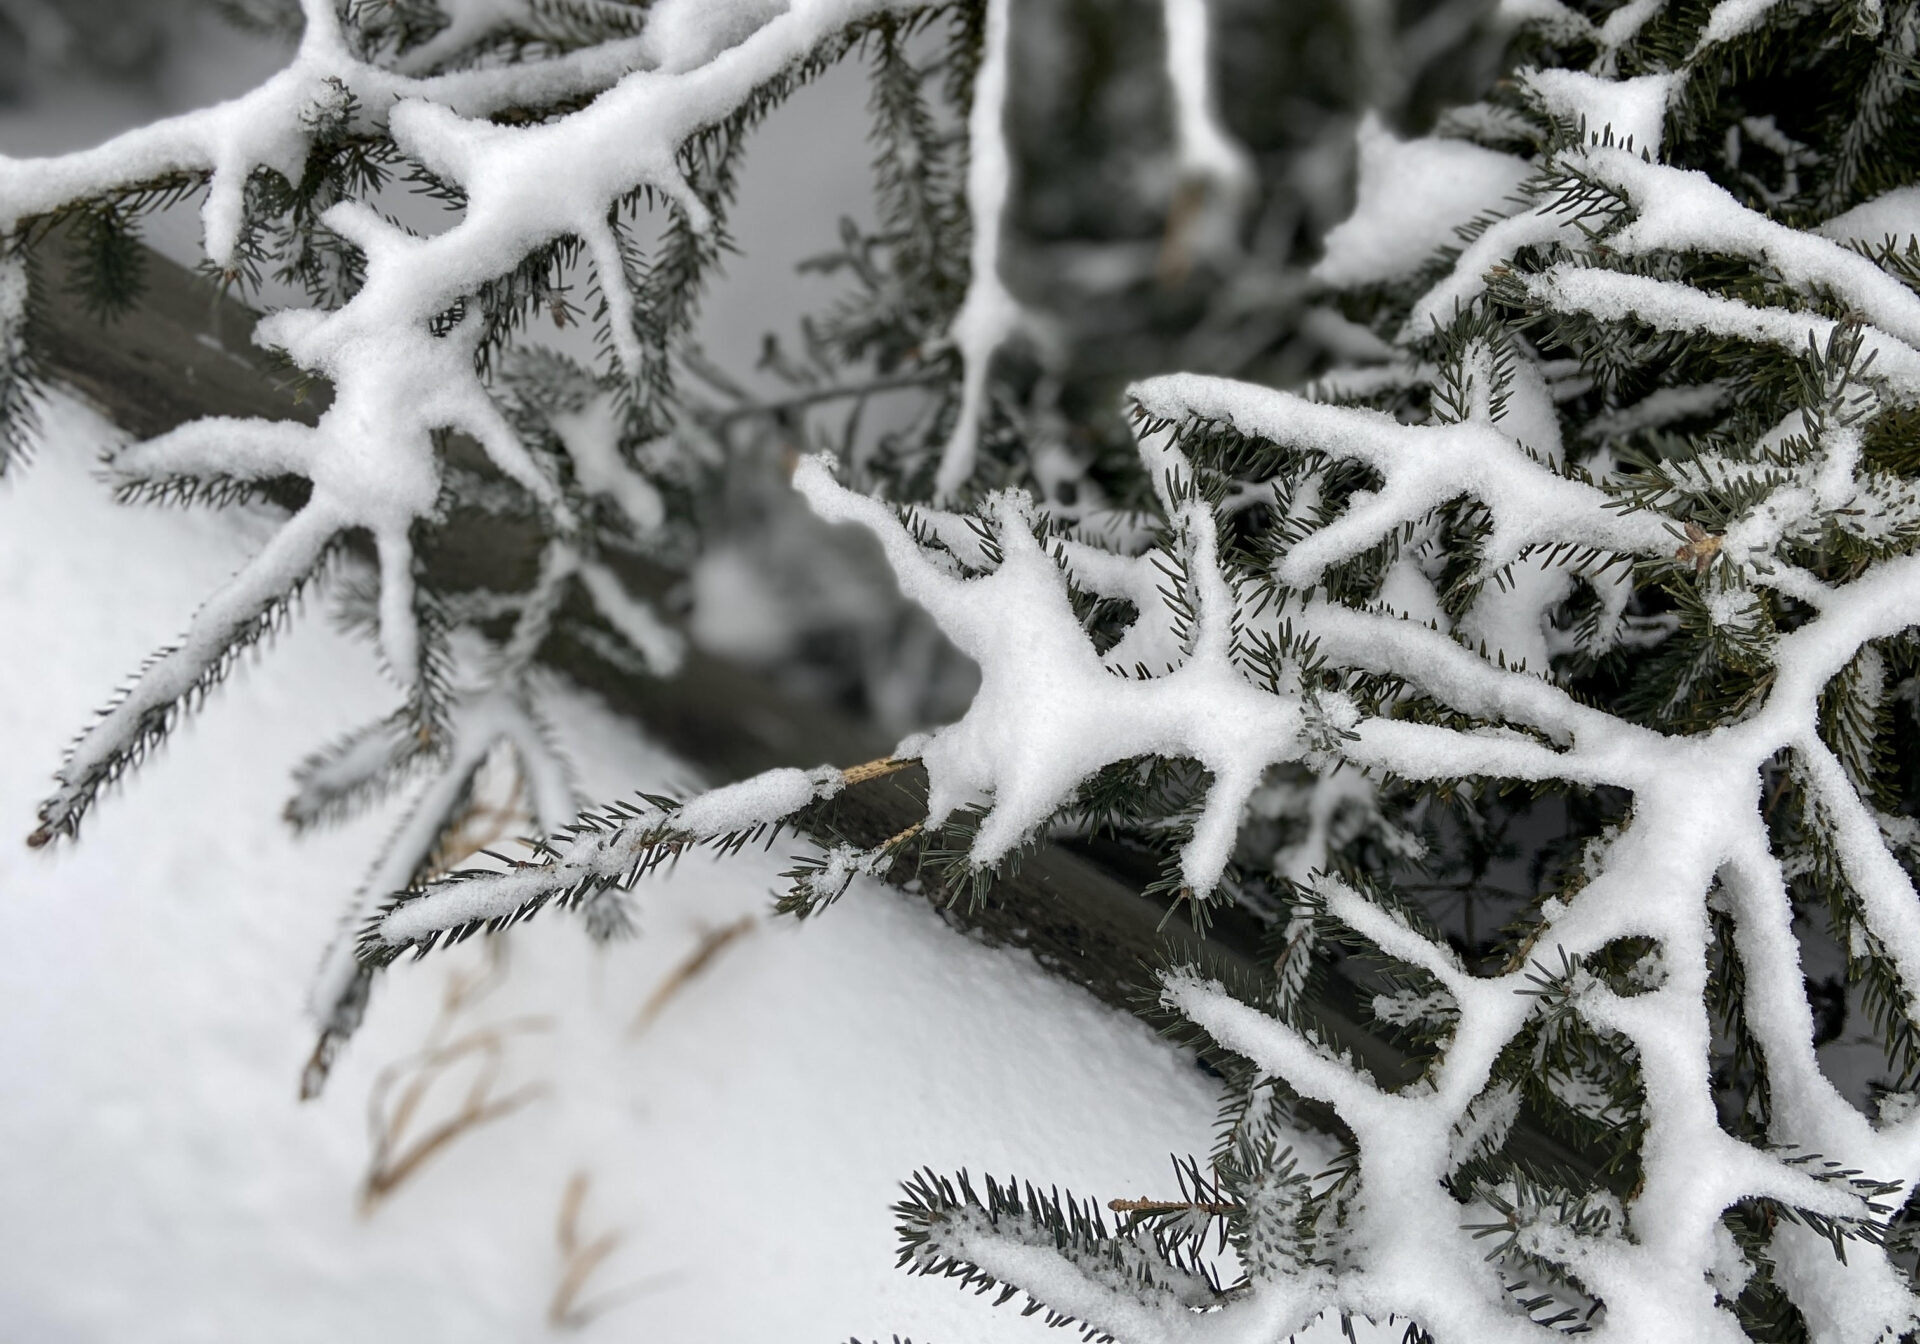 a snow-covered evergreen branch